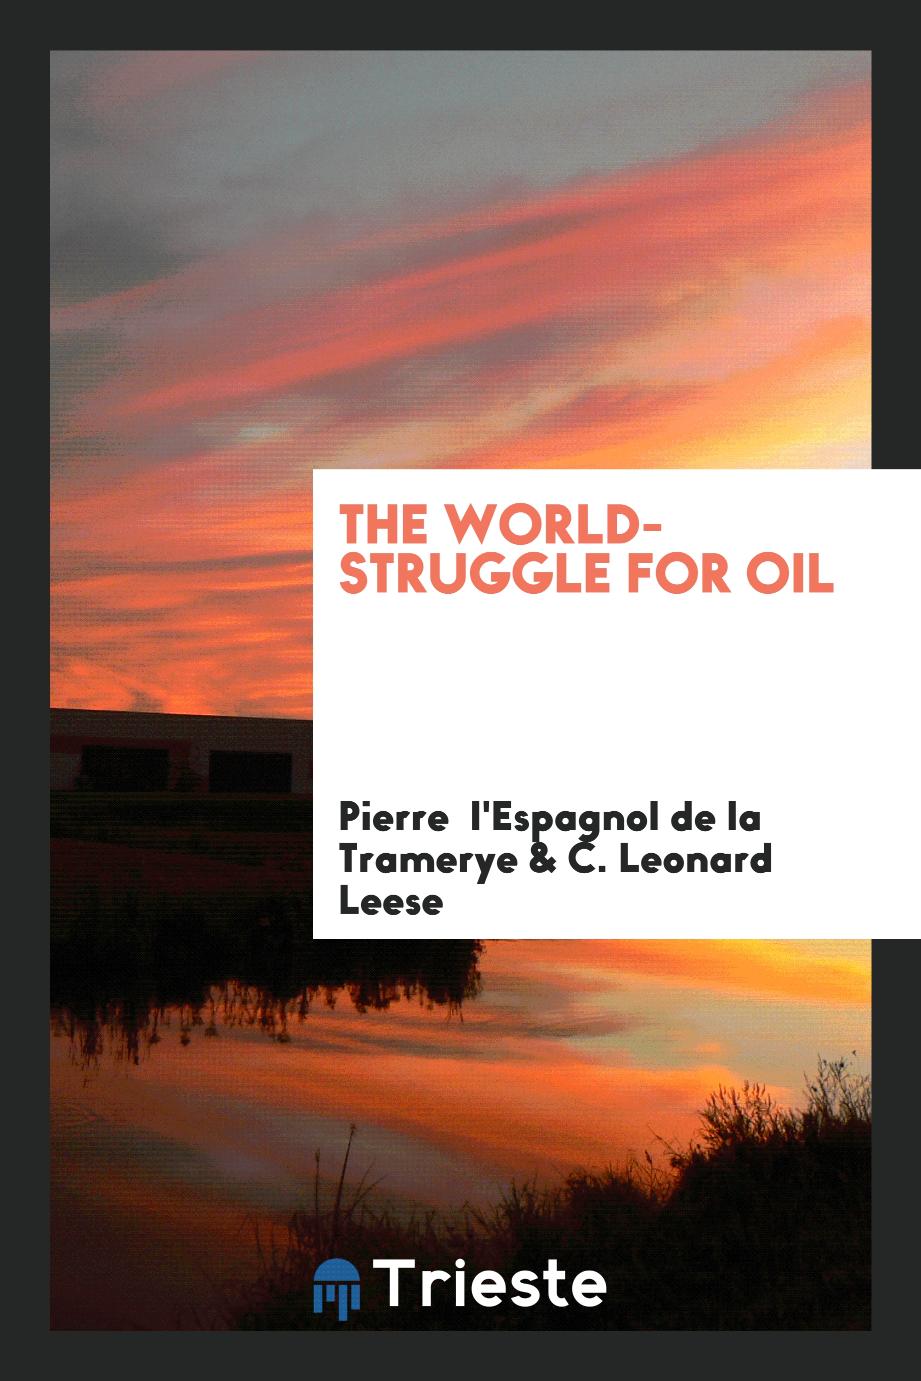 The world-struggle for oil